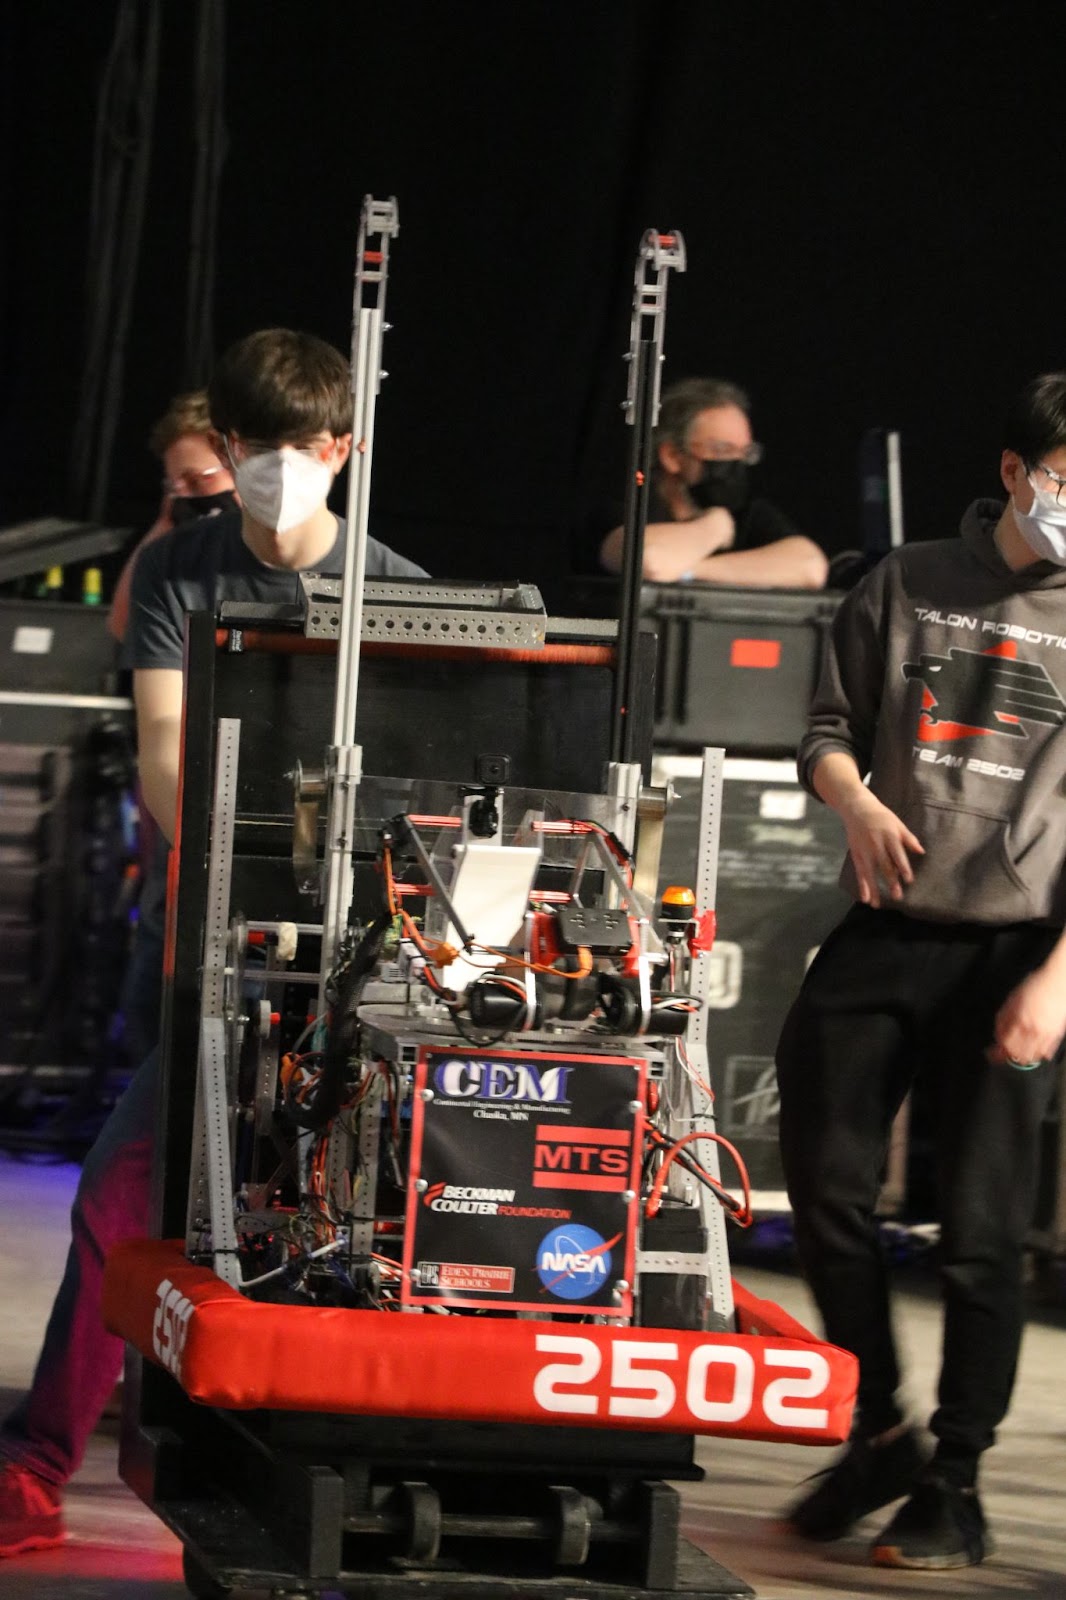 the pit crew using away from the field with the robot.